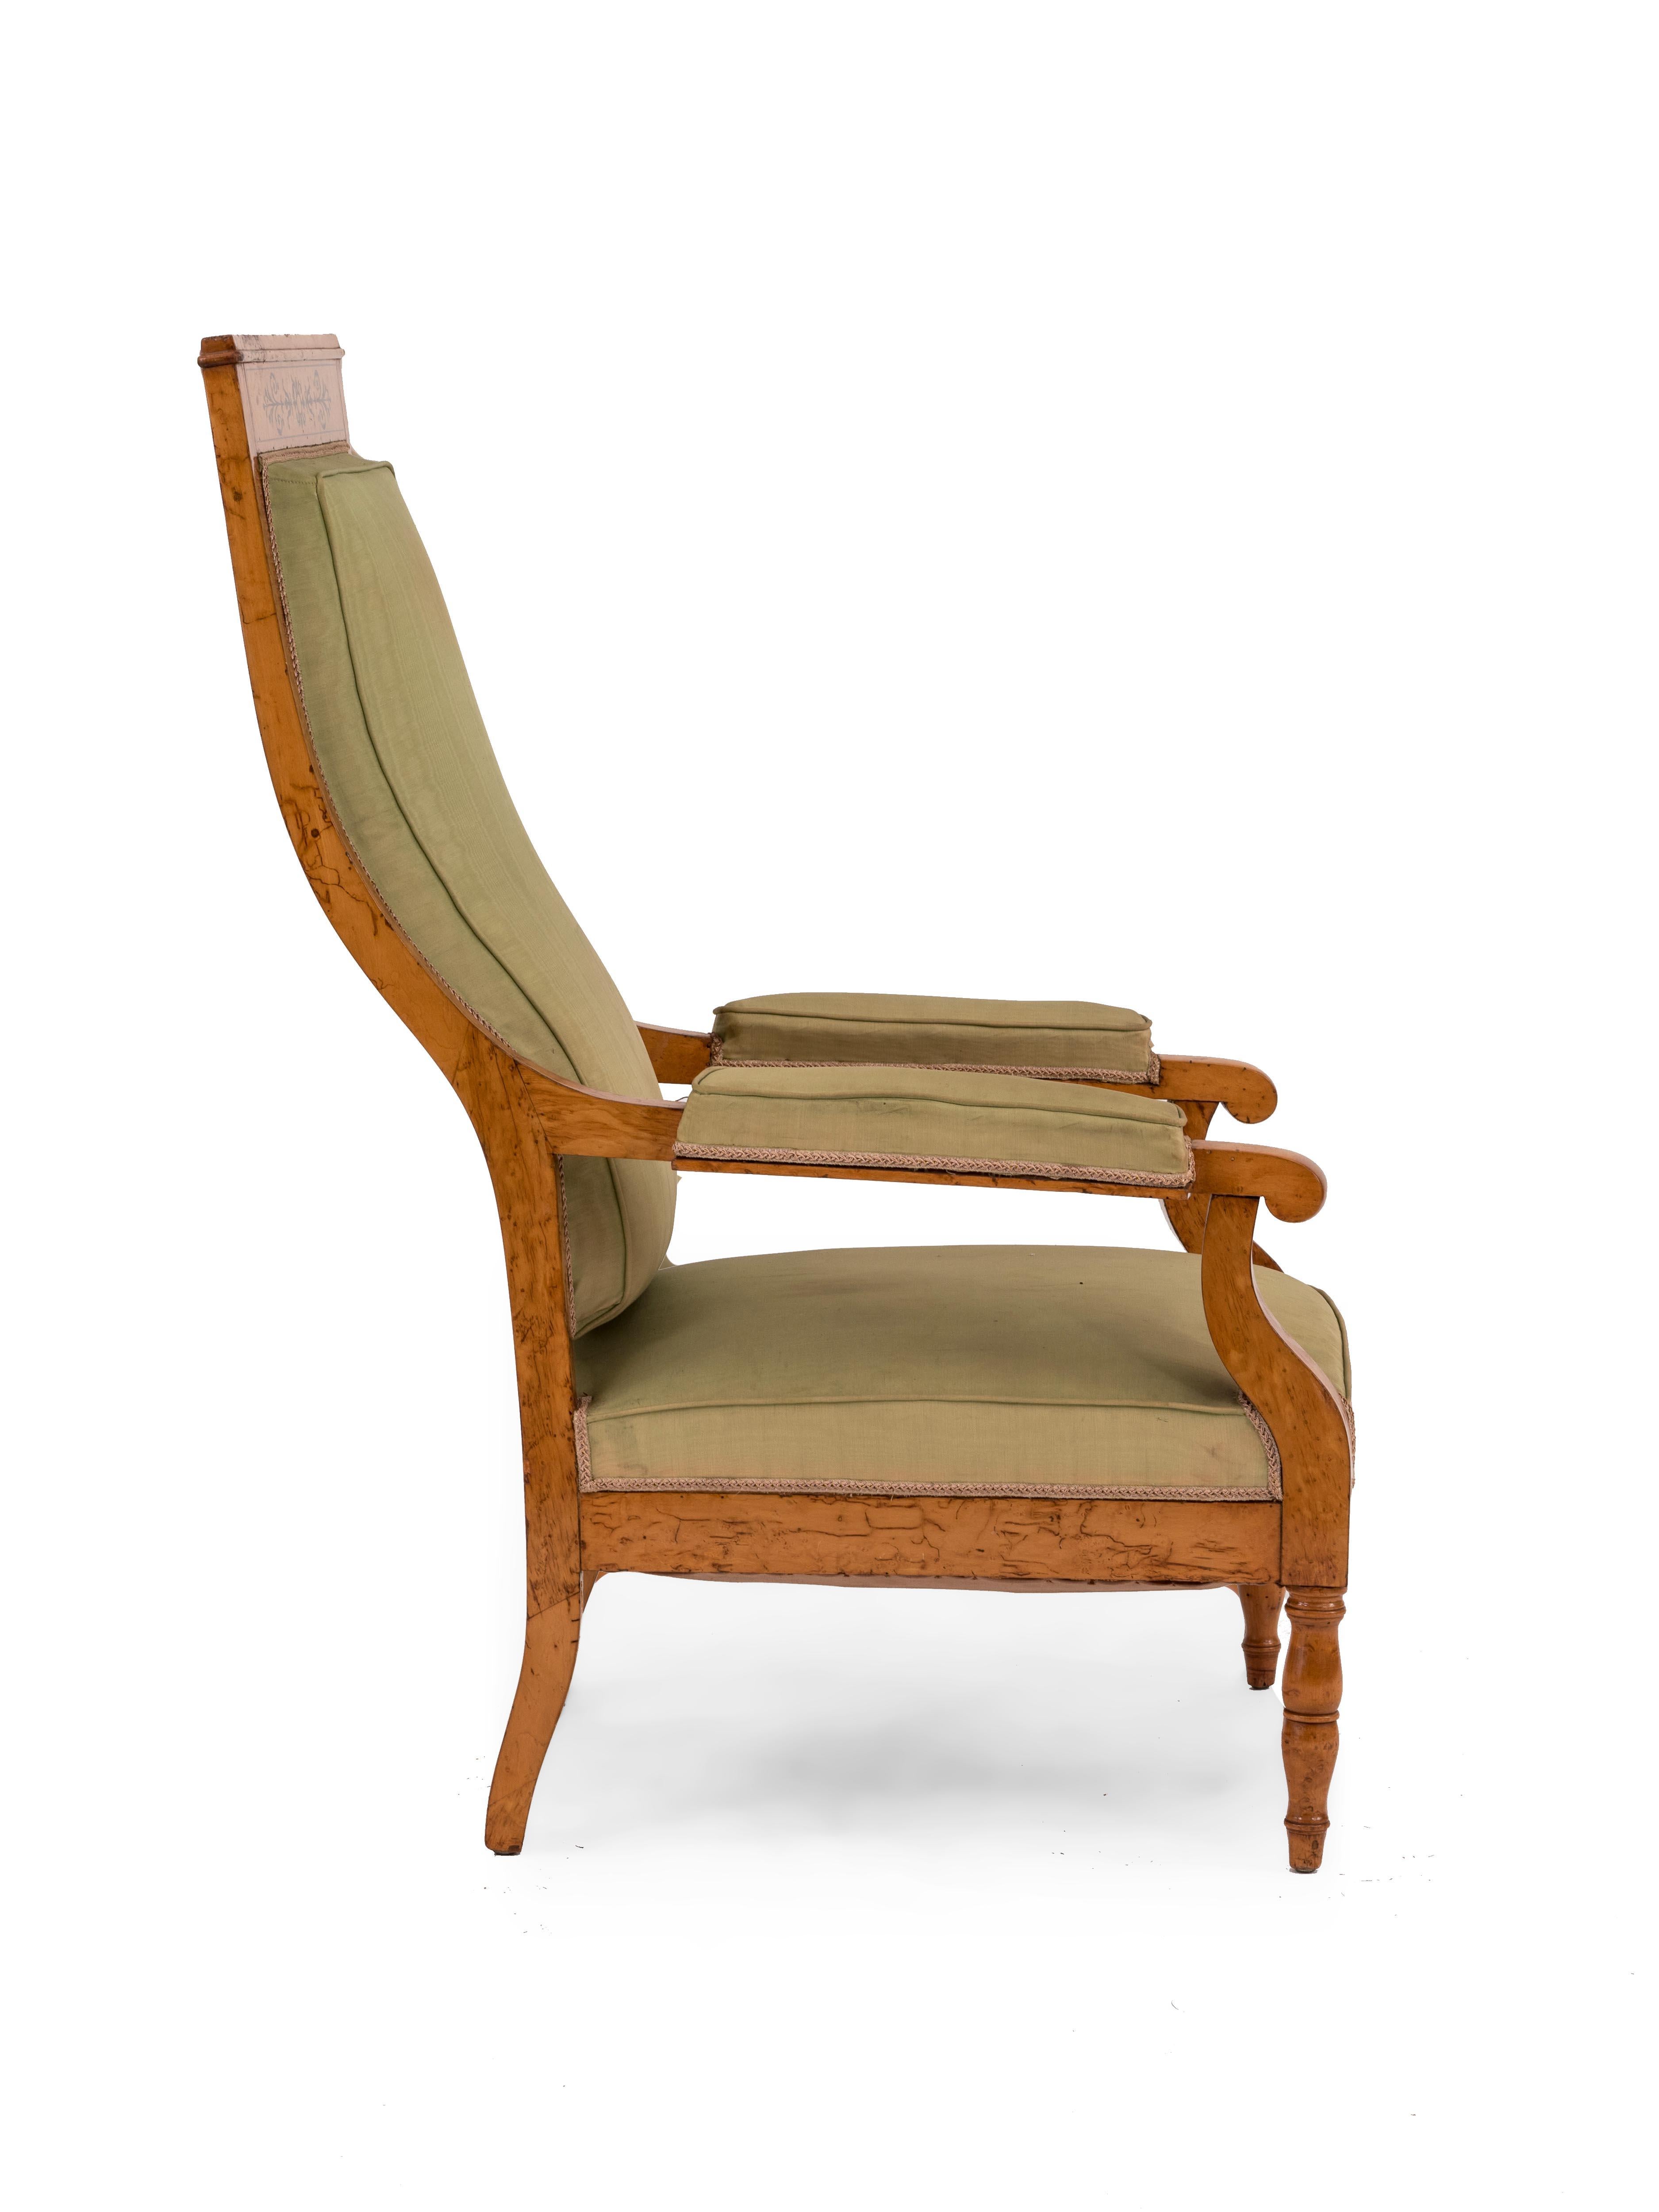 French Charles X maple armchair featuring a sloped high back, scrolling arms, and decorative filigree inlay.